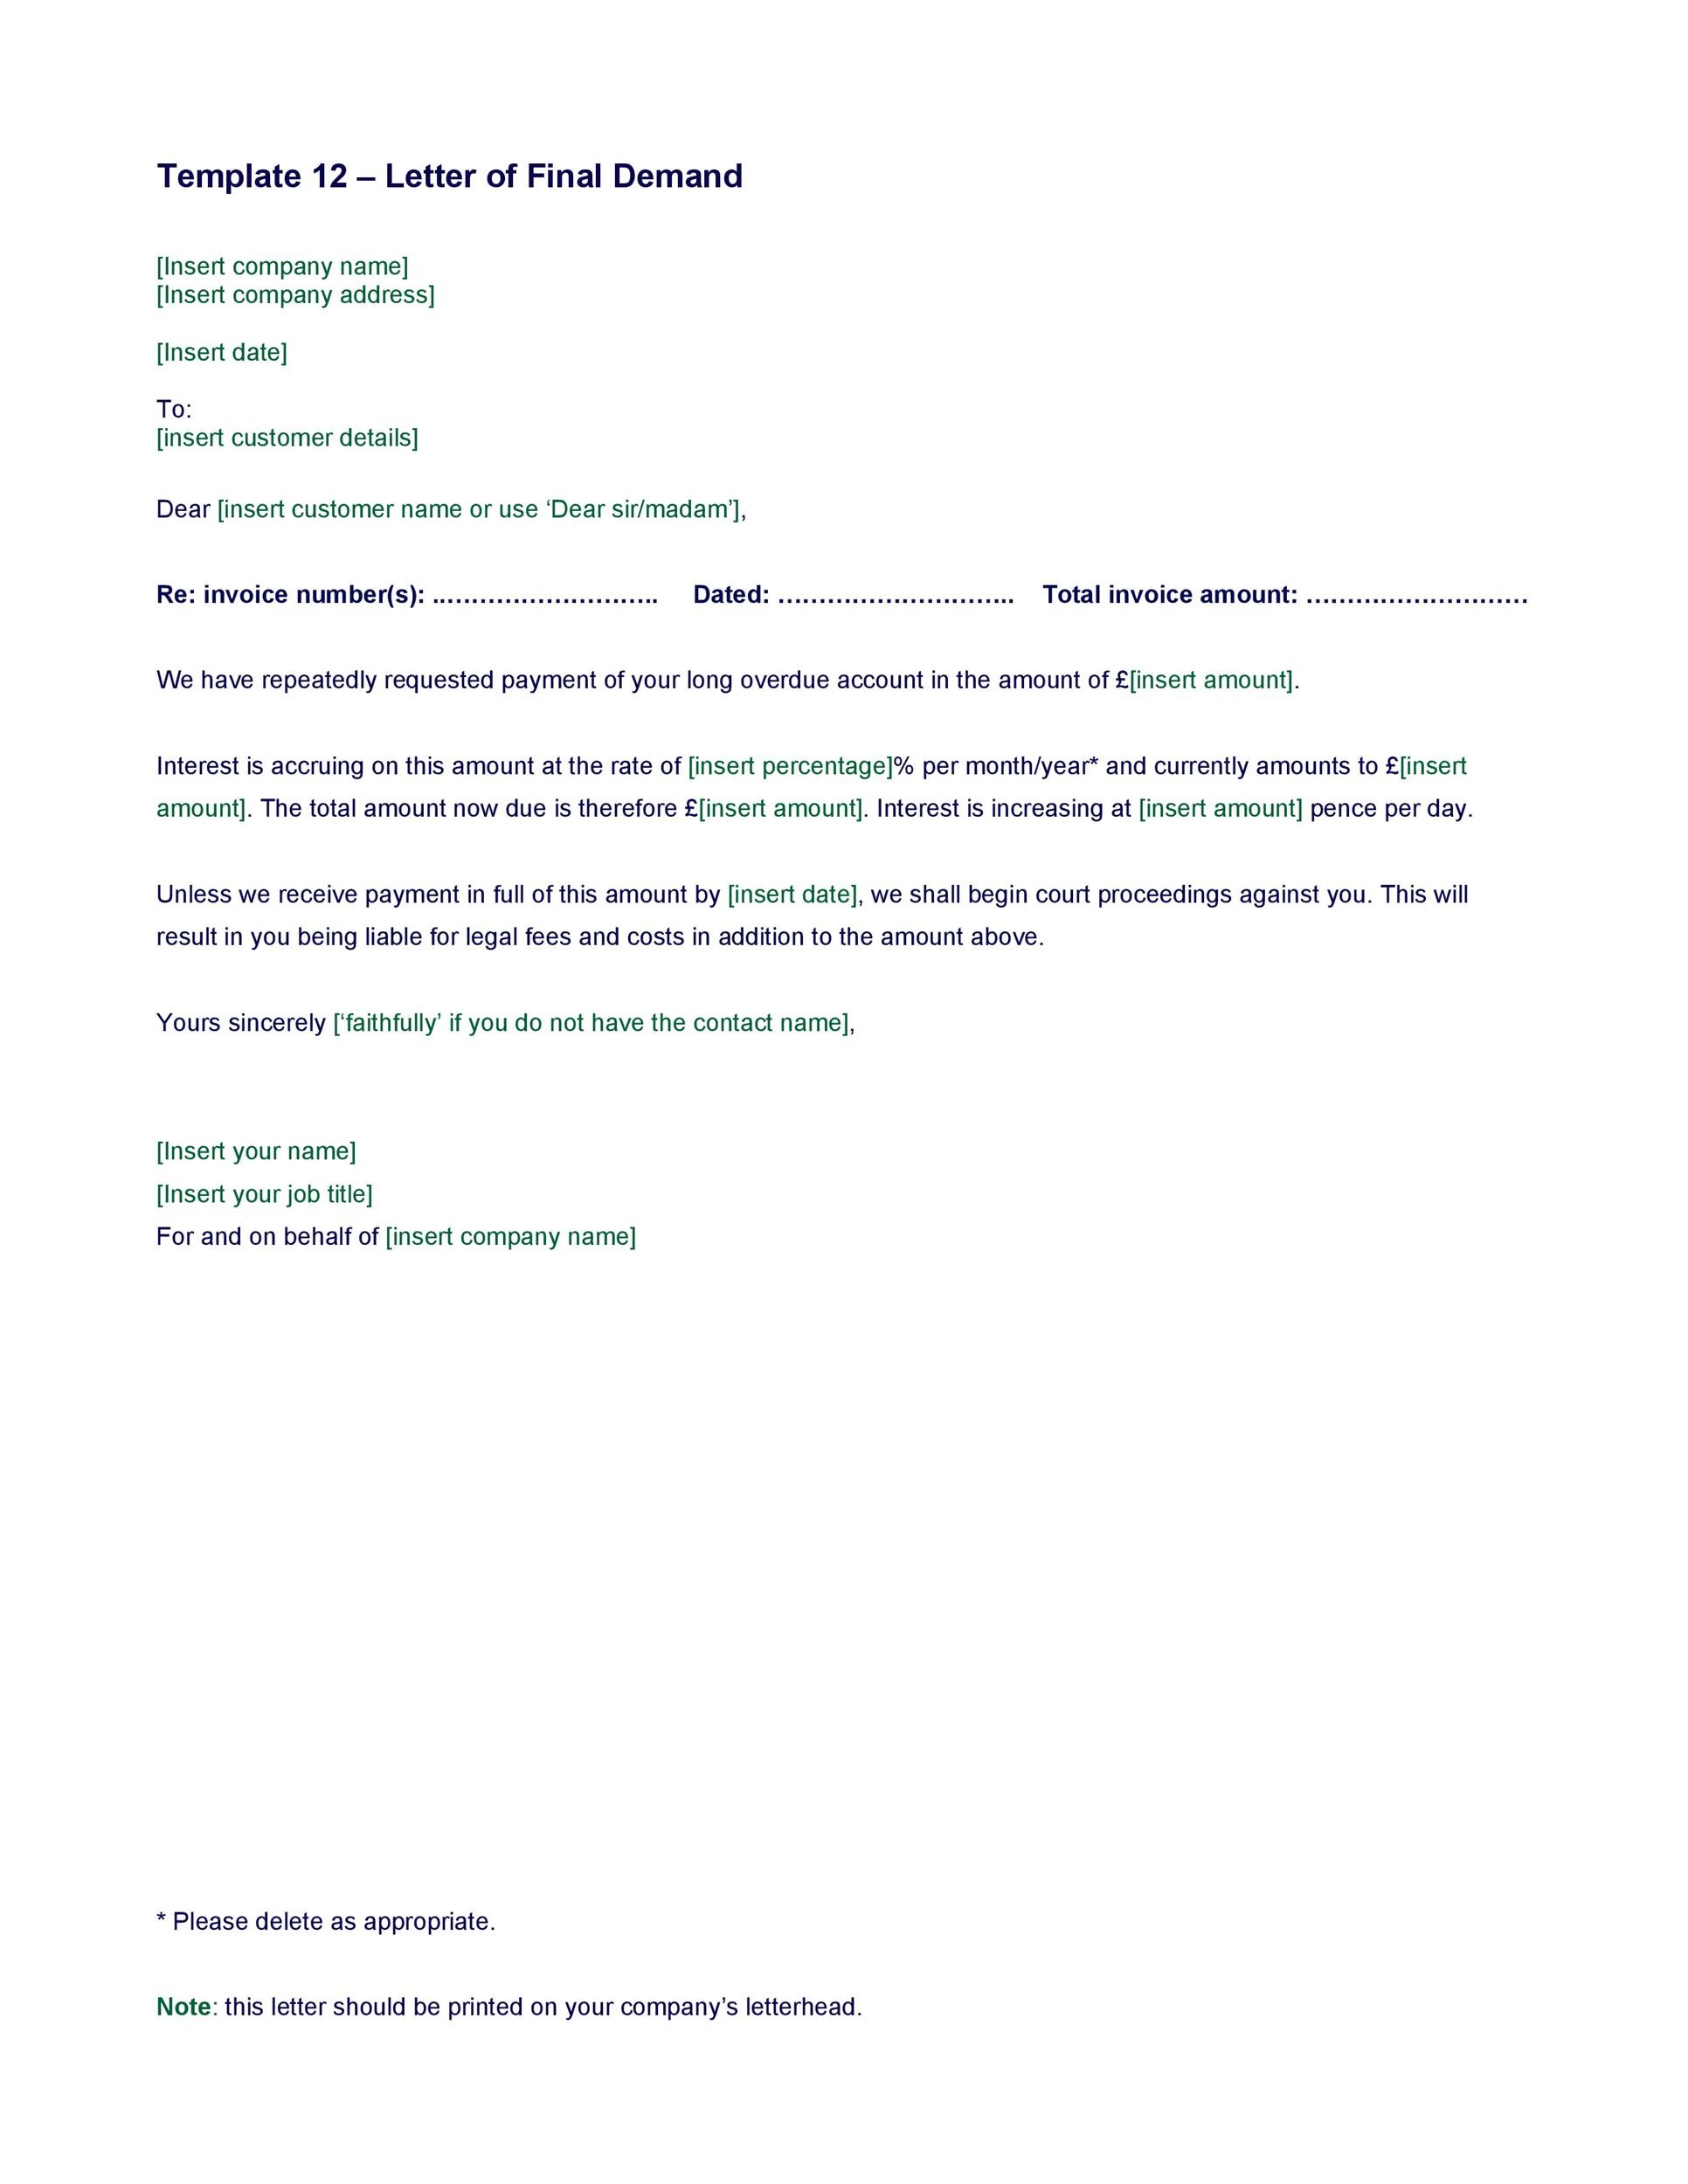 Free Demand Letter Templates With Samples Pdf Word Eforms - Riset